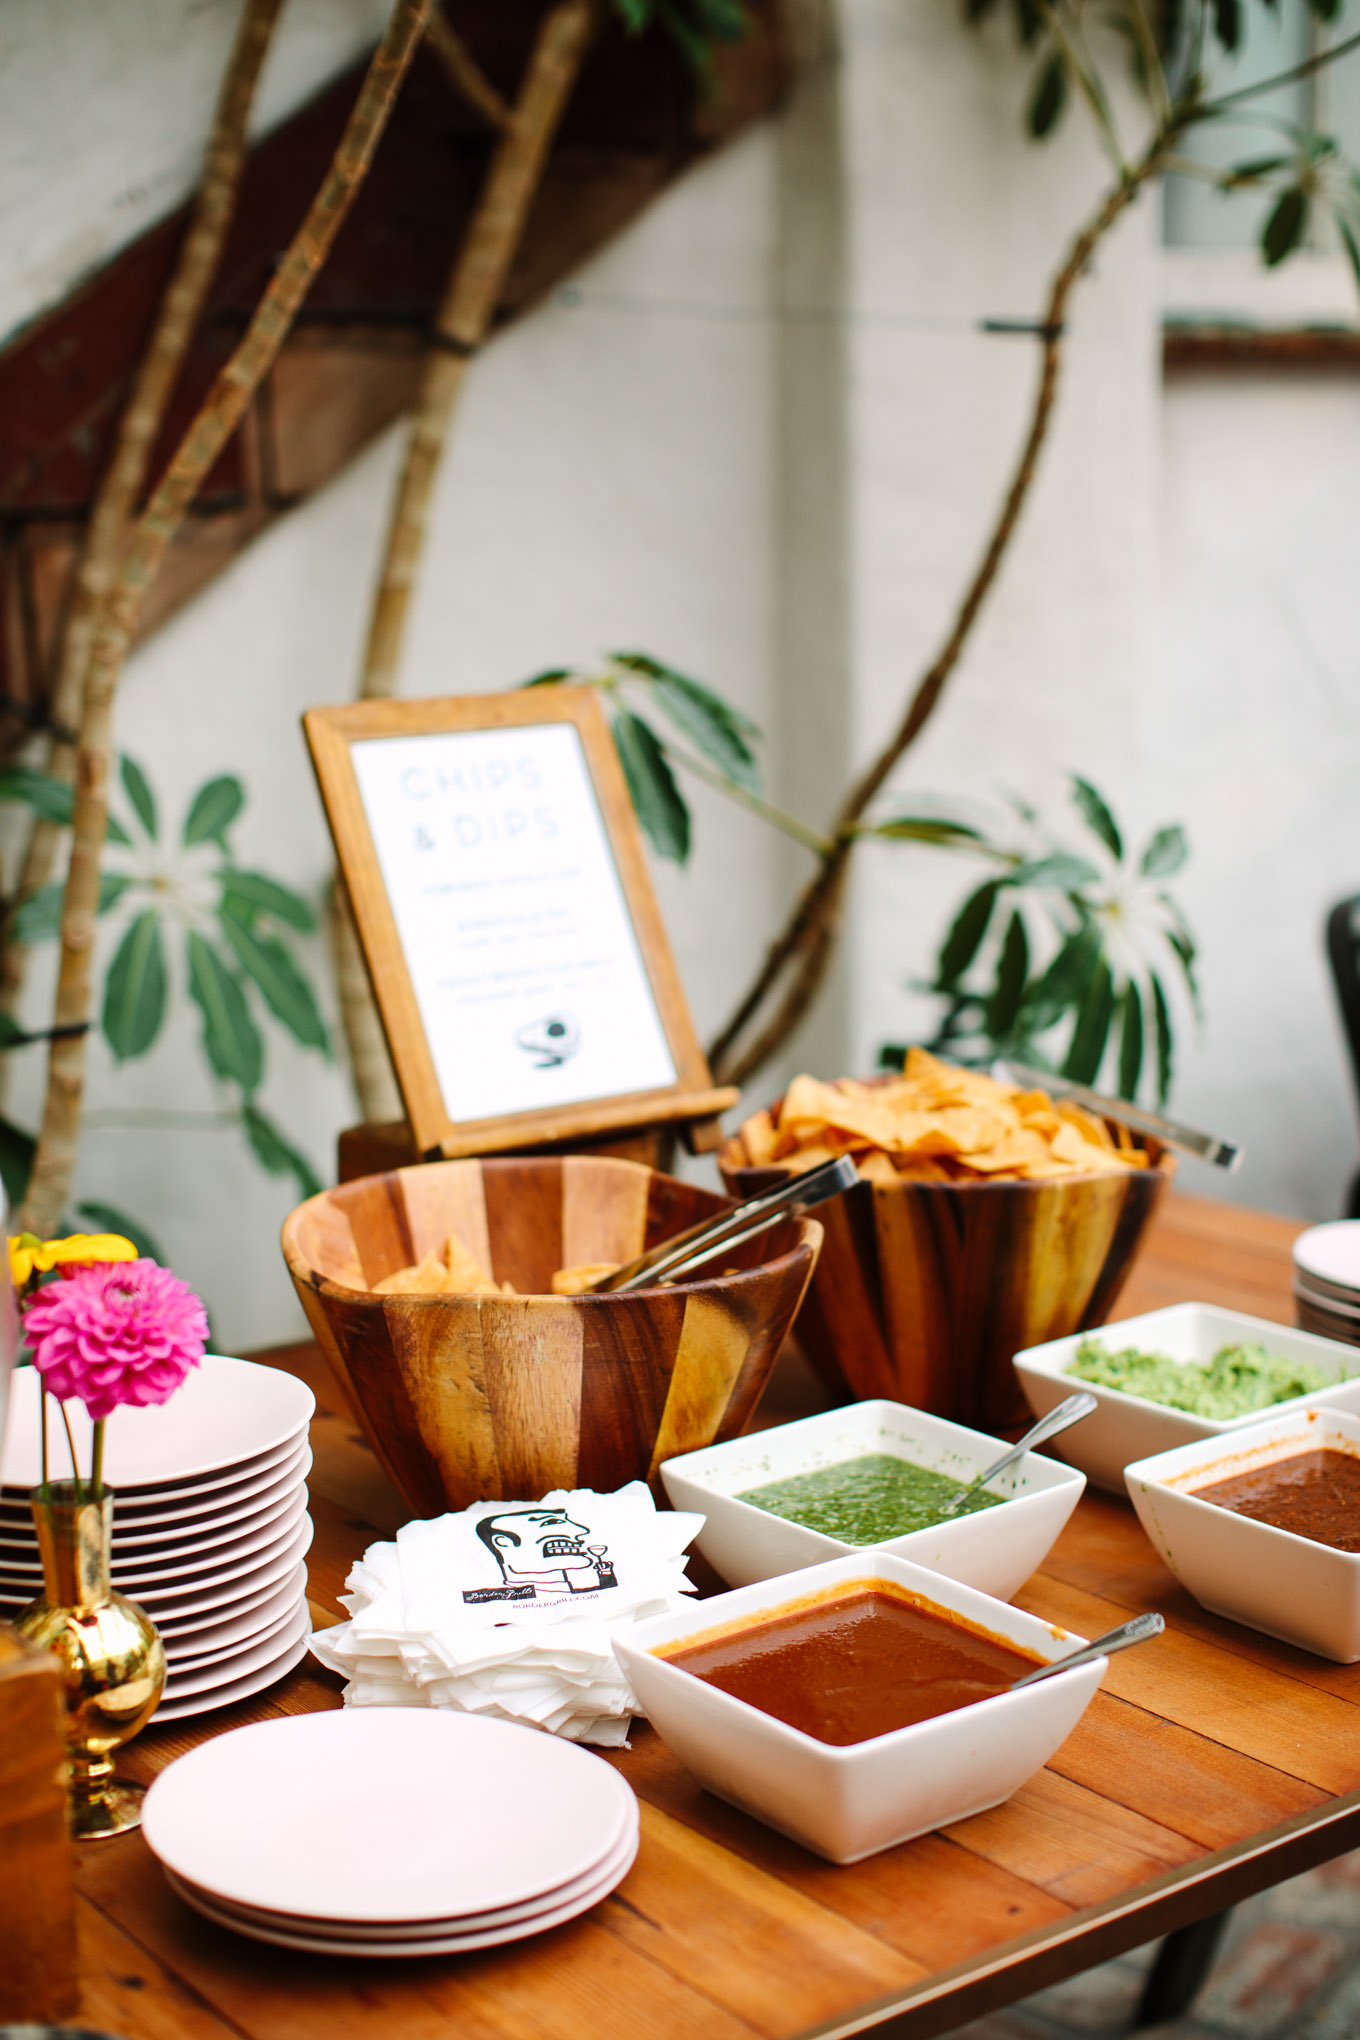 Chips and salsa at wedding cocktail hour | Colorful Downtown Los Angeles Valentine Wedding | Los Angeles wedding photographer | #losangeleswedding #colorfulwedding #DTLA #valentinedtla   Source: Mary Costa Photography | Los Angeles